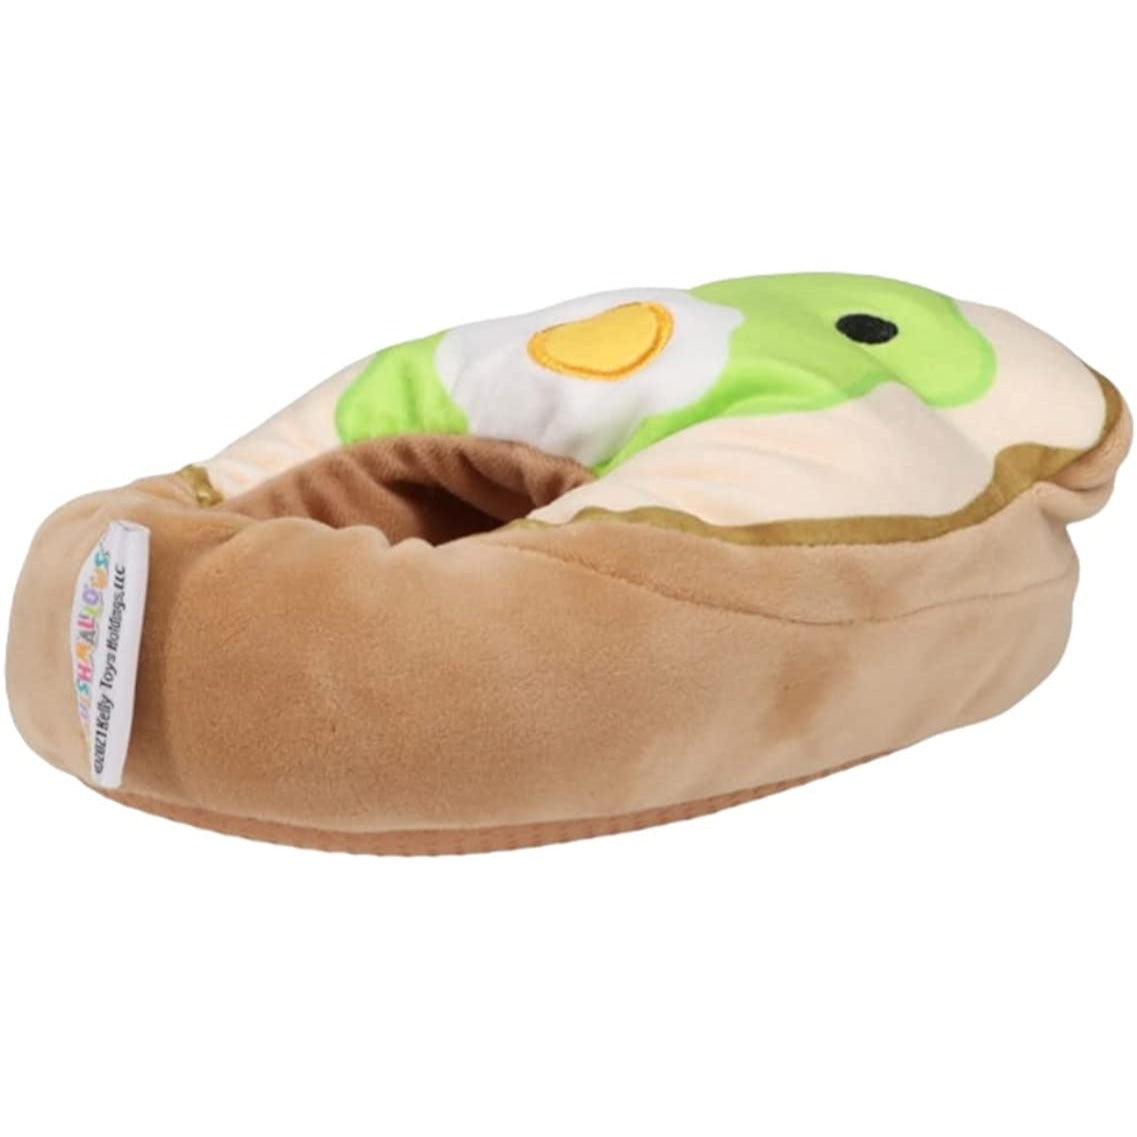 Squishmallows Sinclair the Avocado Toast Kids Plush Slippers